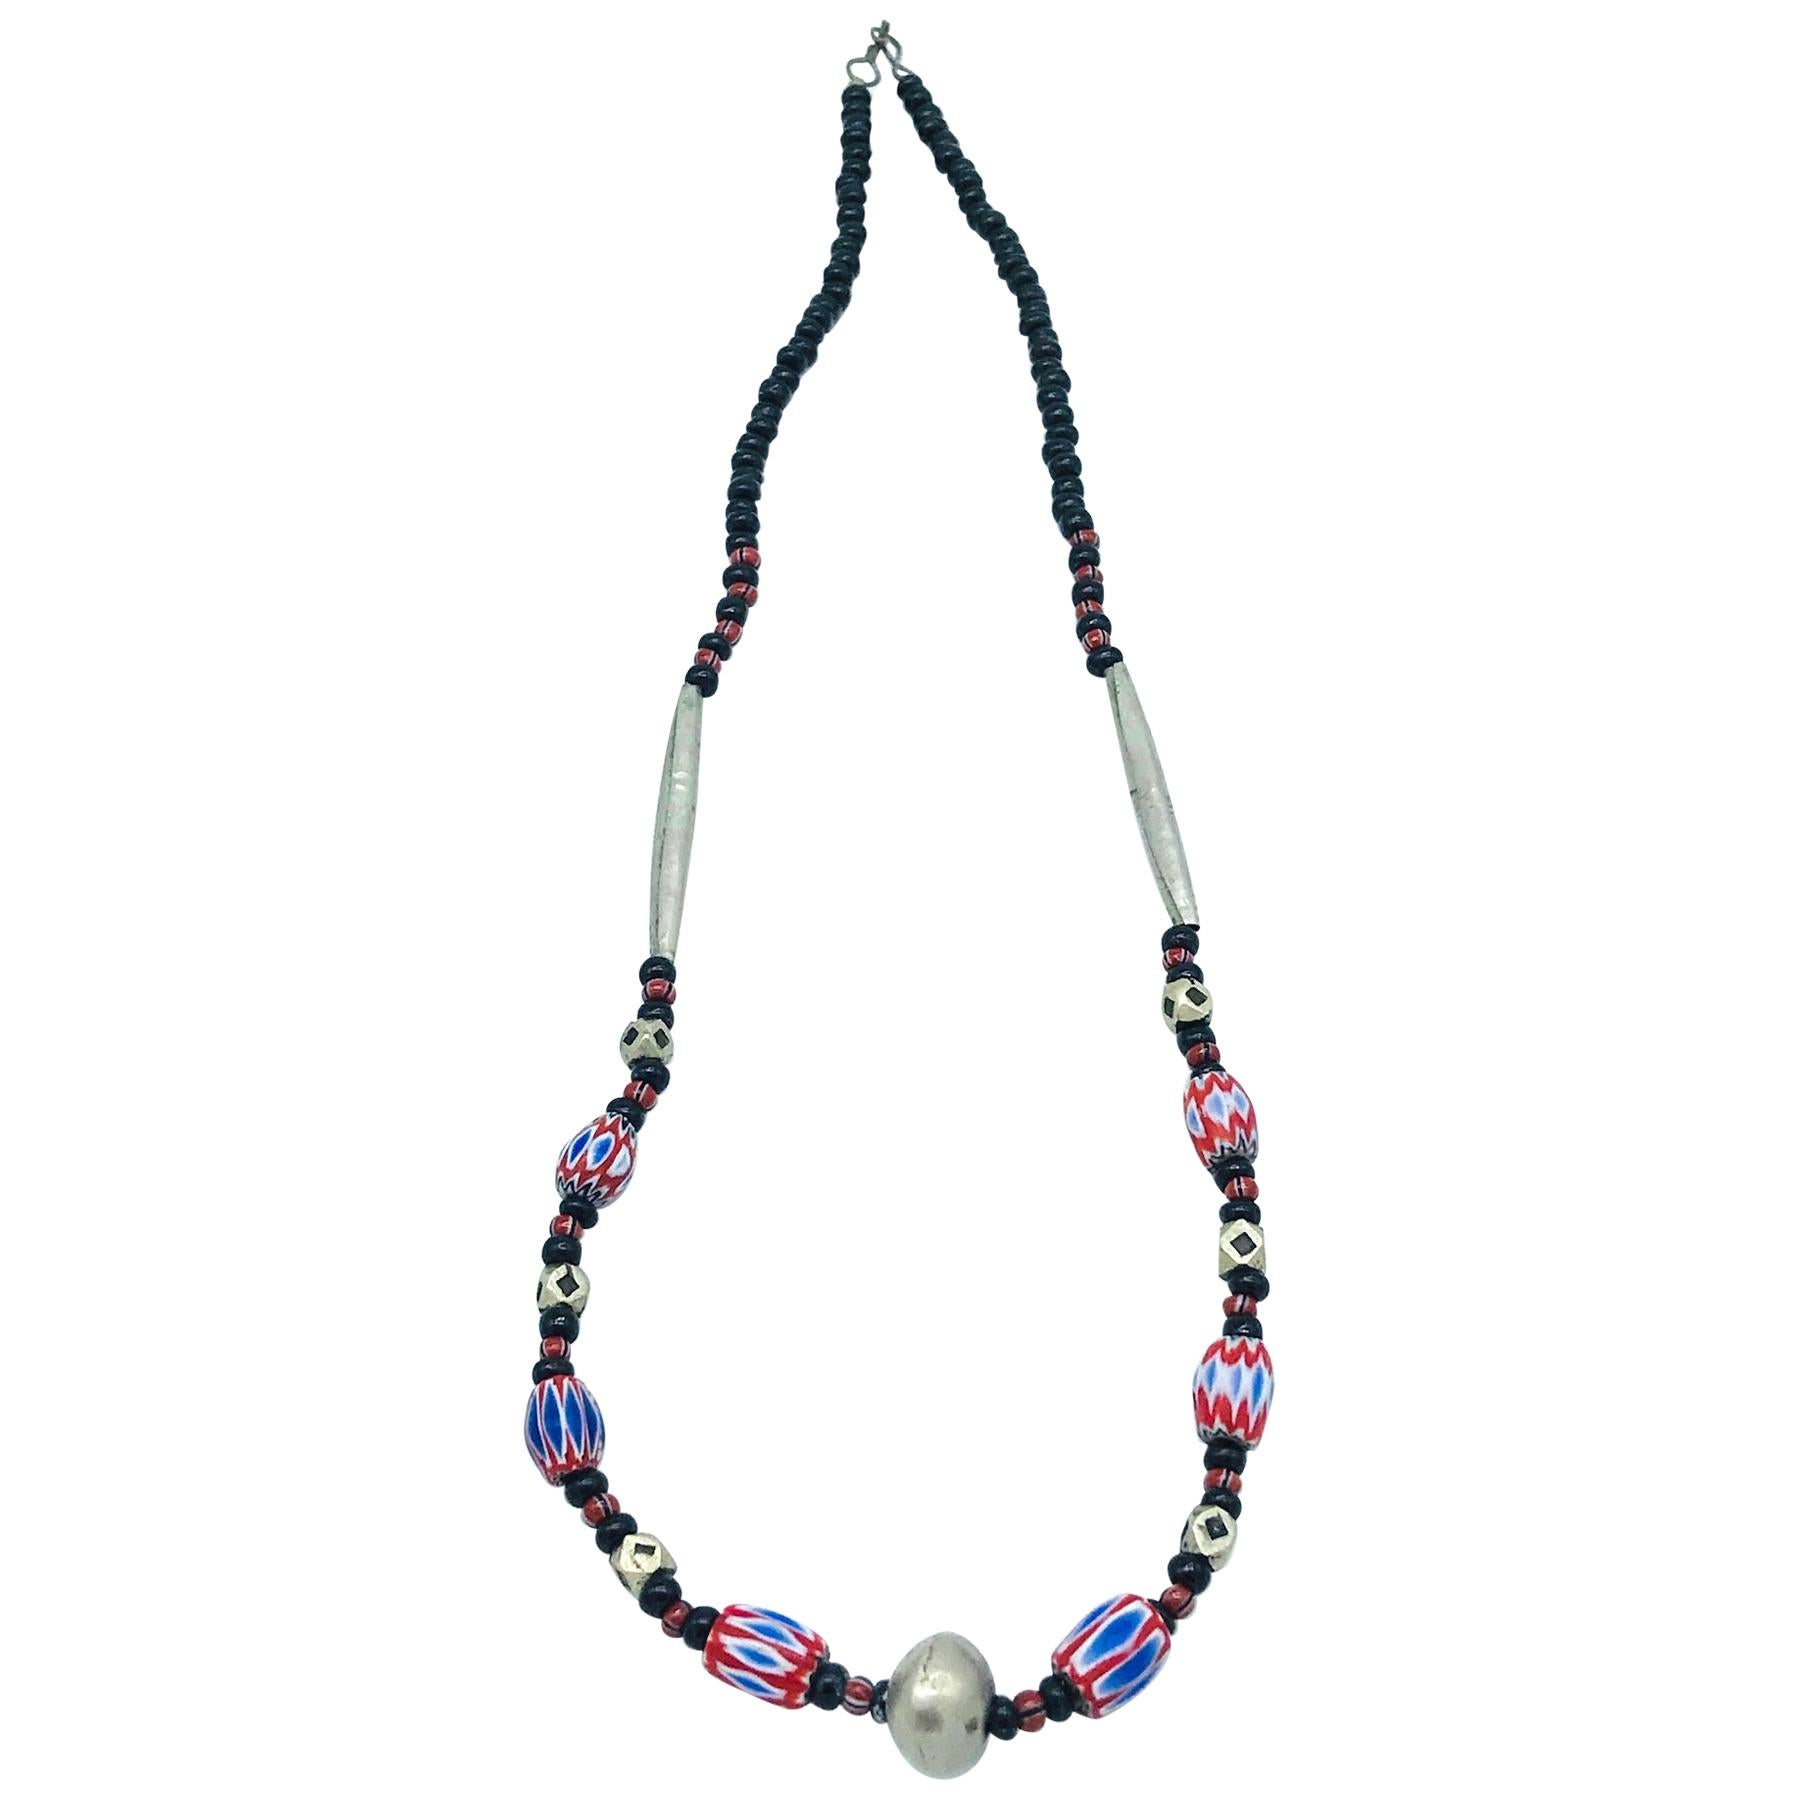 Mali Africa, Hand Red-White Blue Painted Bead Necklace 19 For Sale